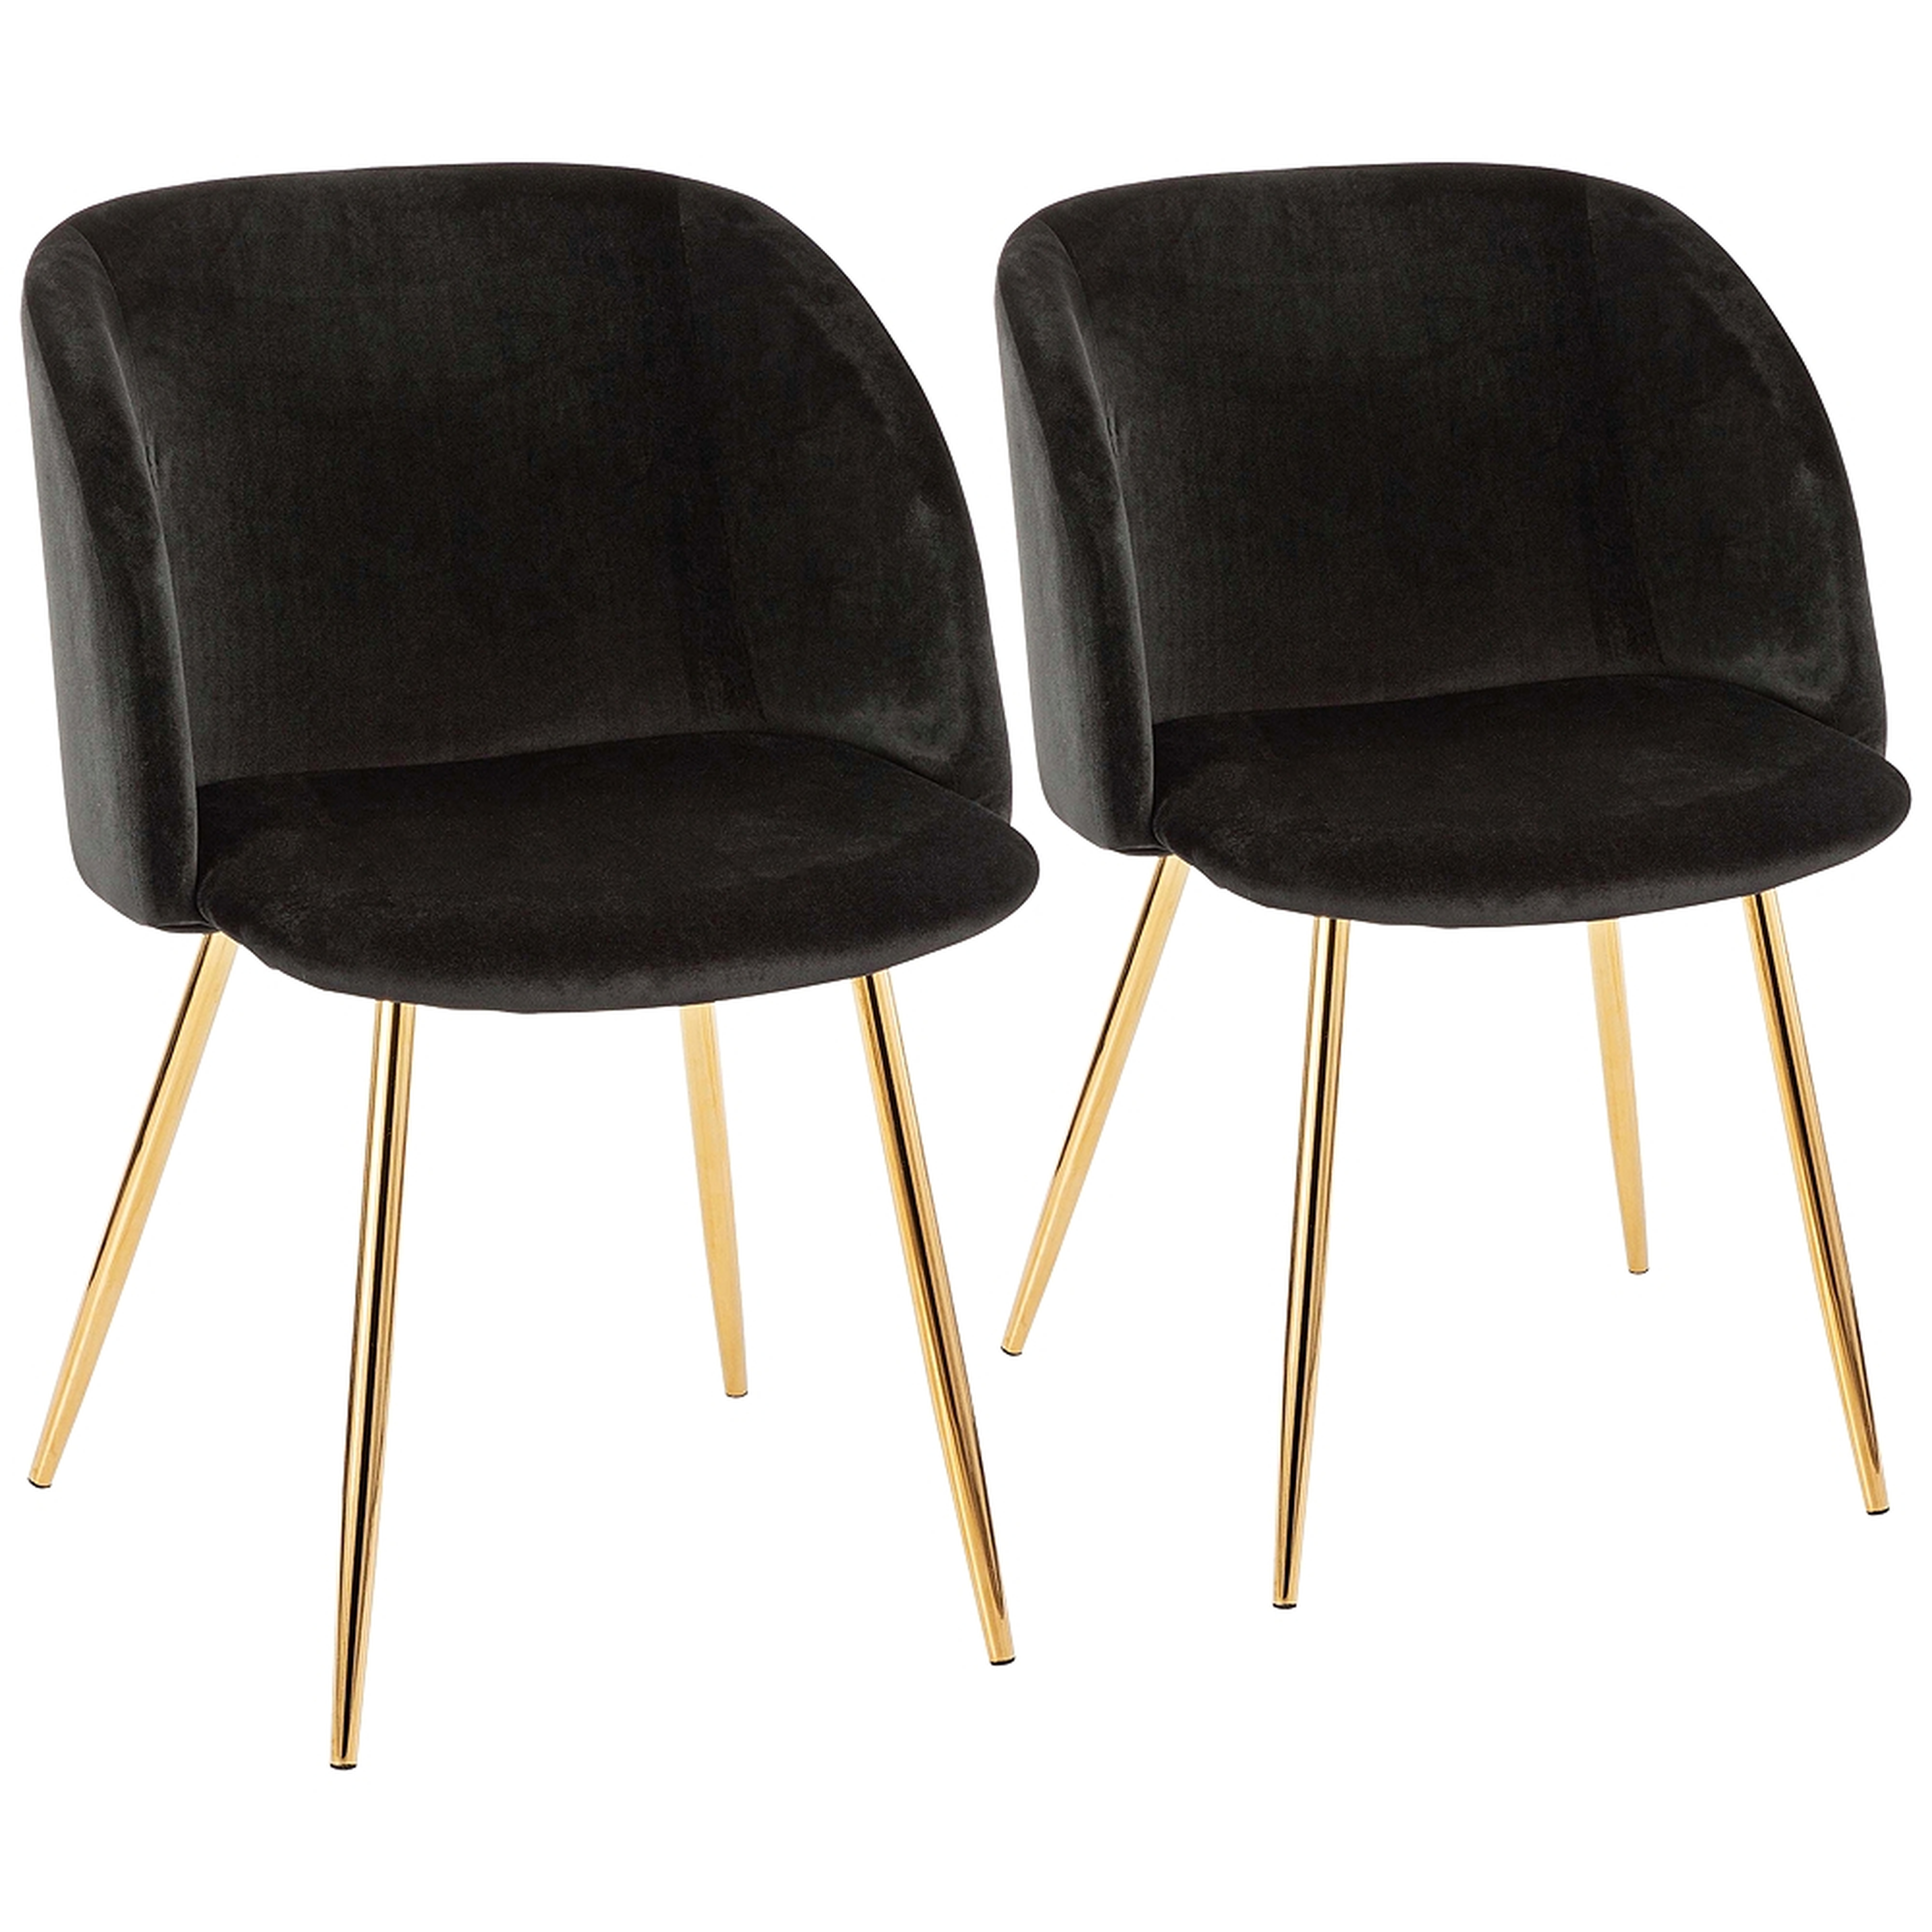 Fran Gold Metal and Black Velvet Dining Chairs Set of 2 - Style # 60G31 - Lamps Plus